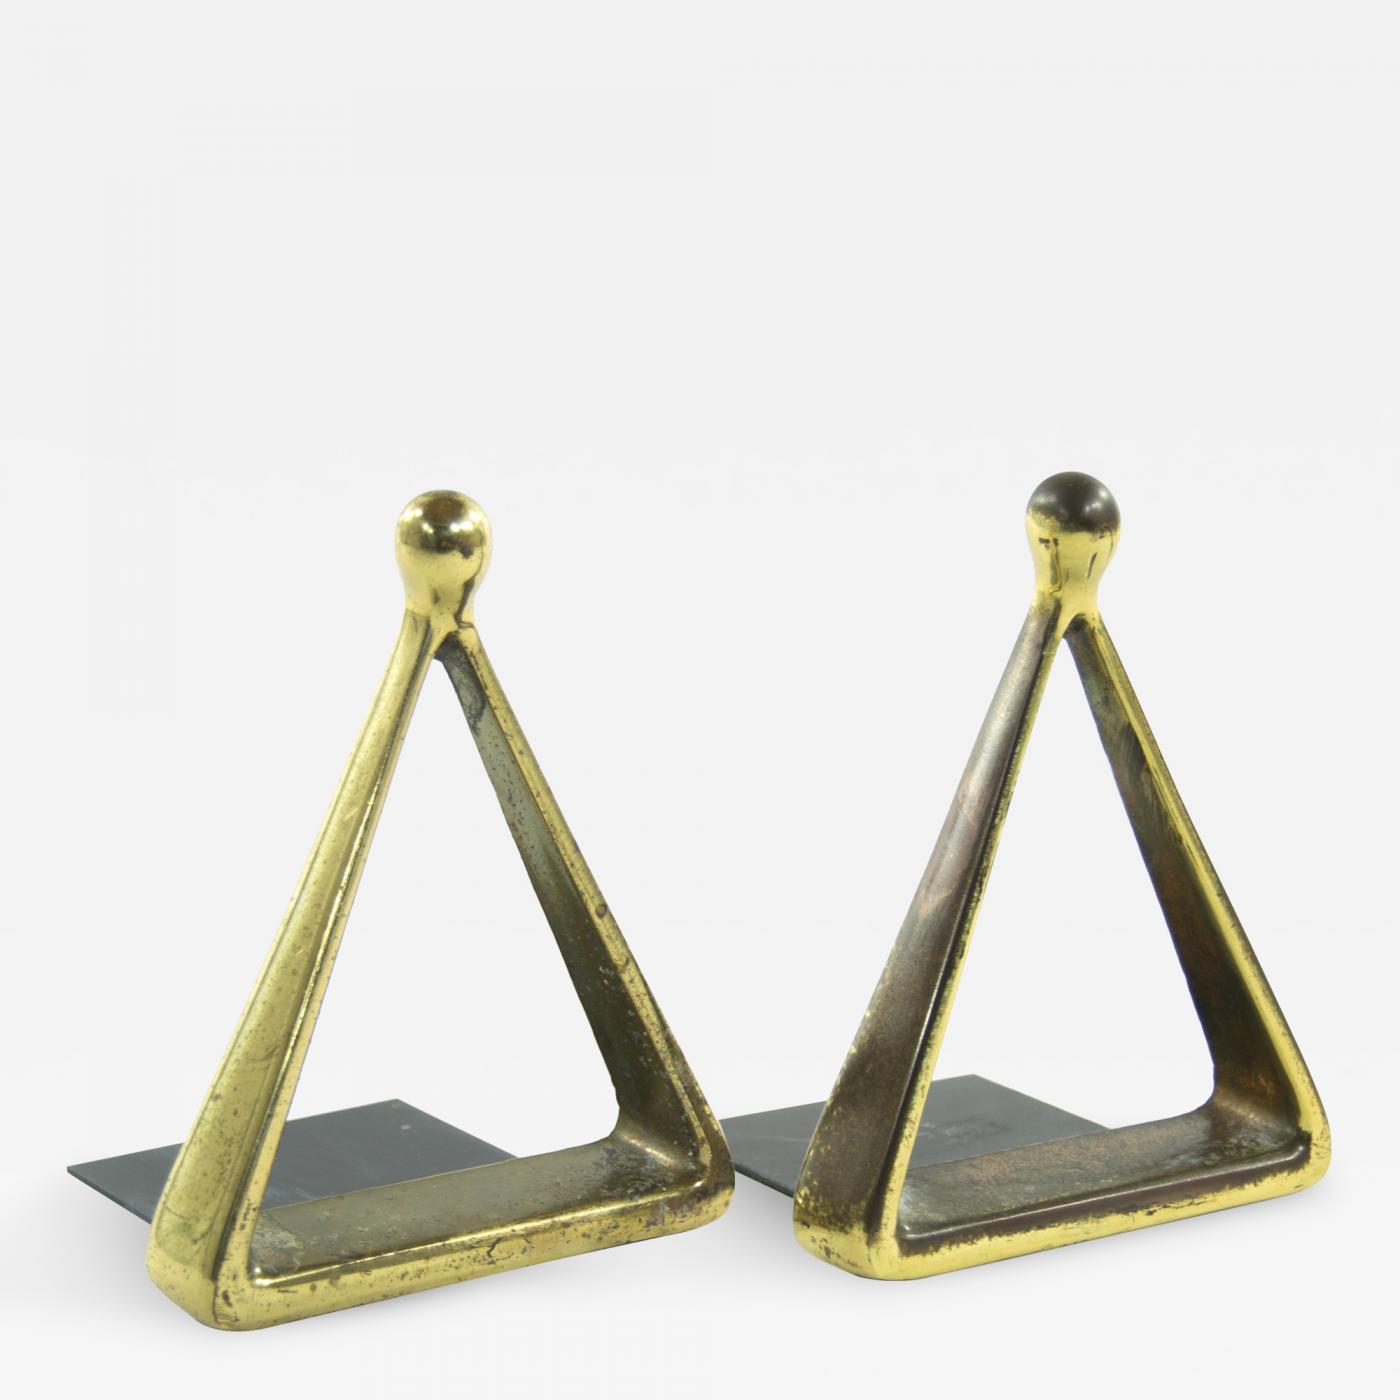 Brass Bookends by Ben Seibel for Jenfred Ware